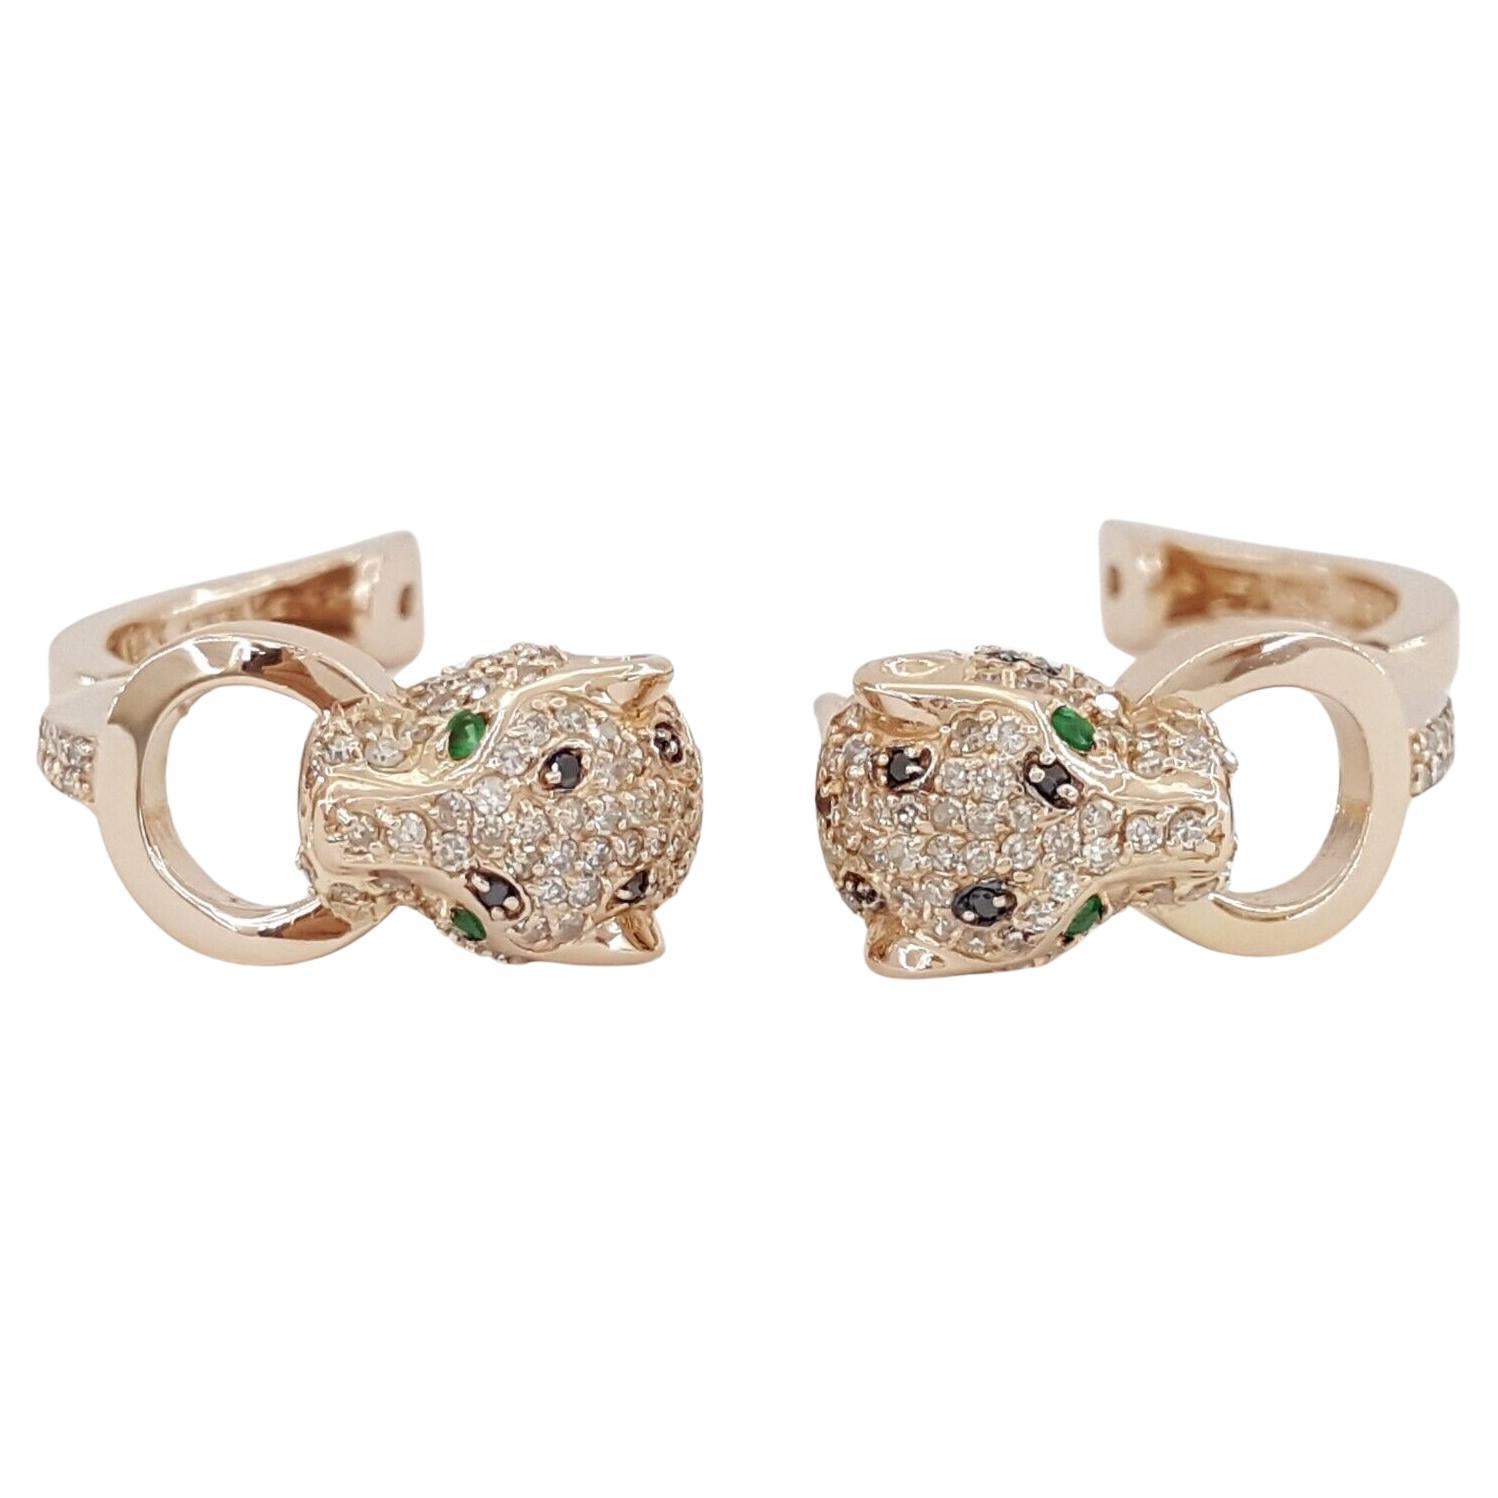 These are EFFY's distinctive Panther Hoops Earrings crafted in 14k Rose Gold, featuring a total weight of 0.89 carats of Round Cut White & Black Diamonds, complemented by vibrant Green Emerald accents. The earrings weigh 8.8 grams and showcase Round